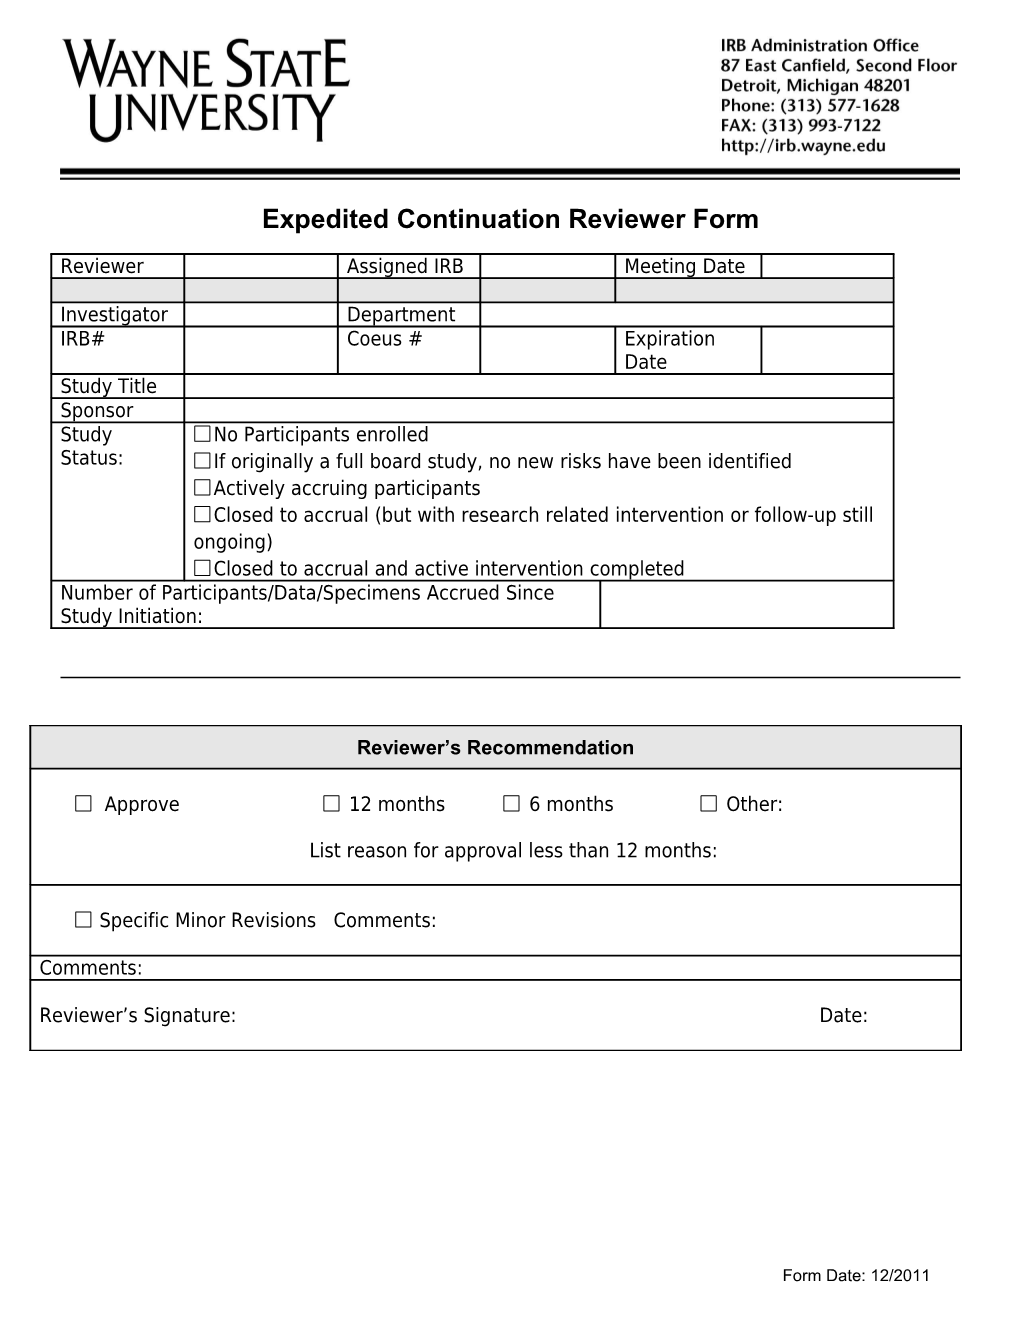 Expedited Continuation Reviewer Form